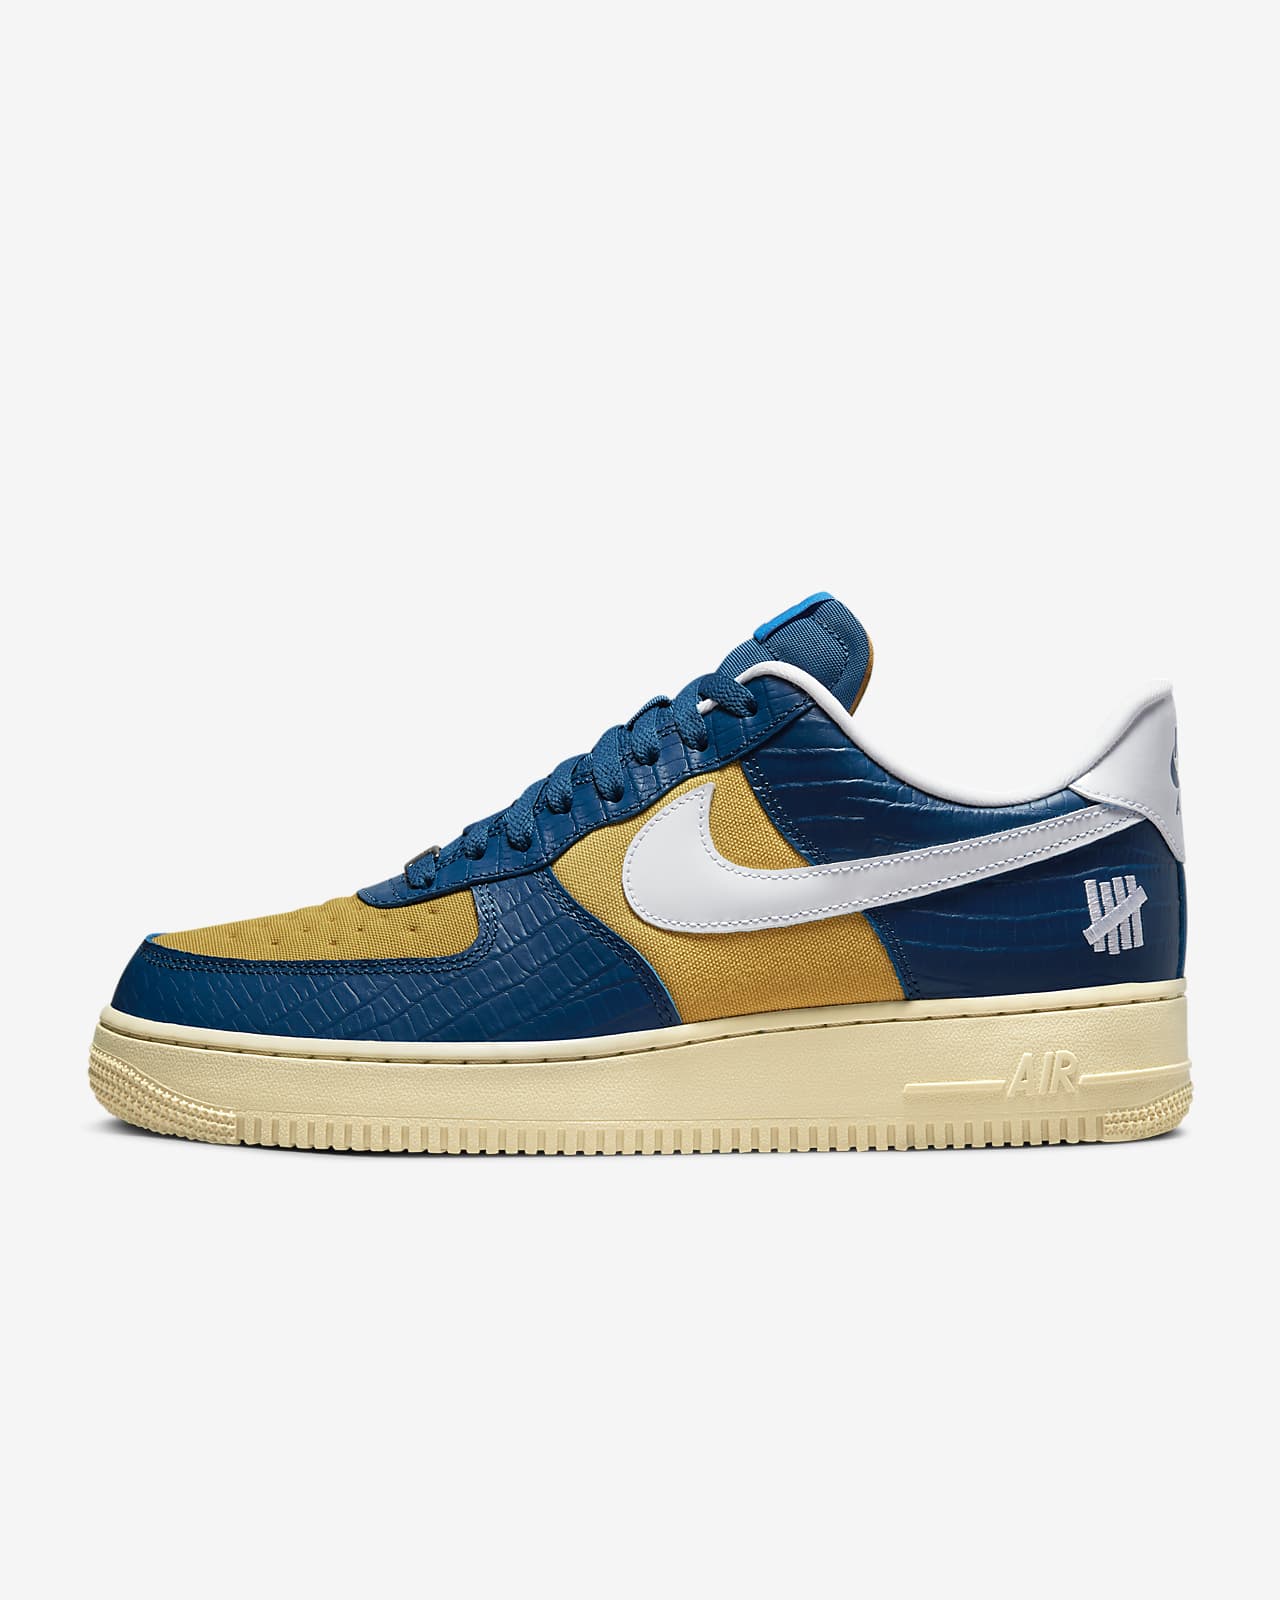 Nike Air Force 1 Low SP Shoes